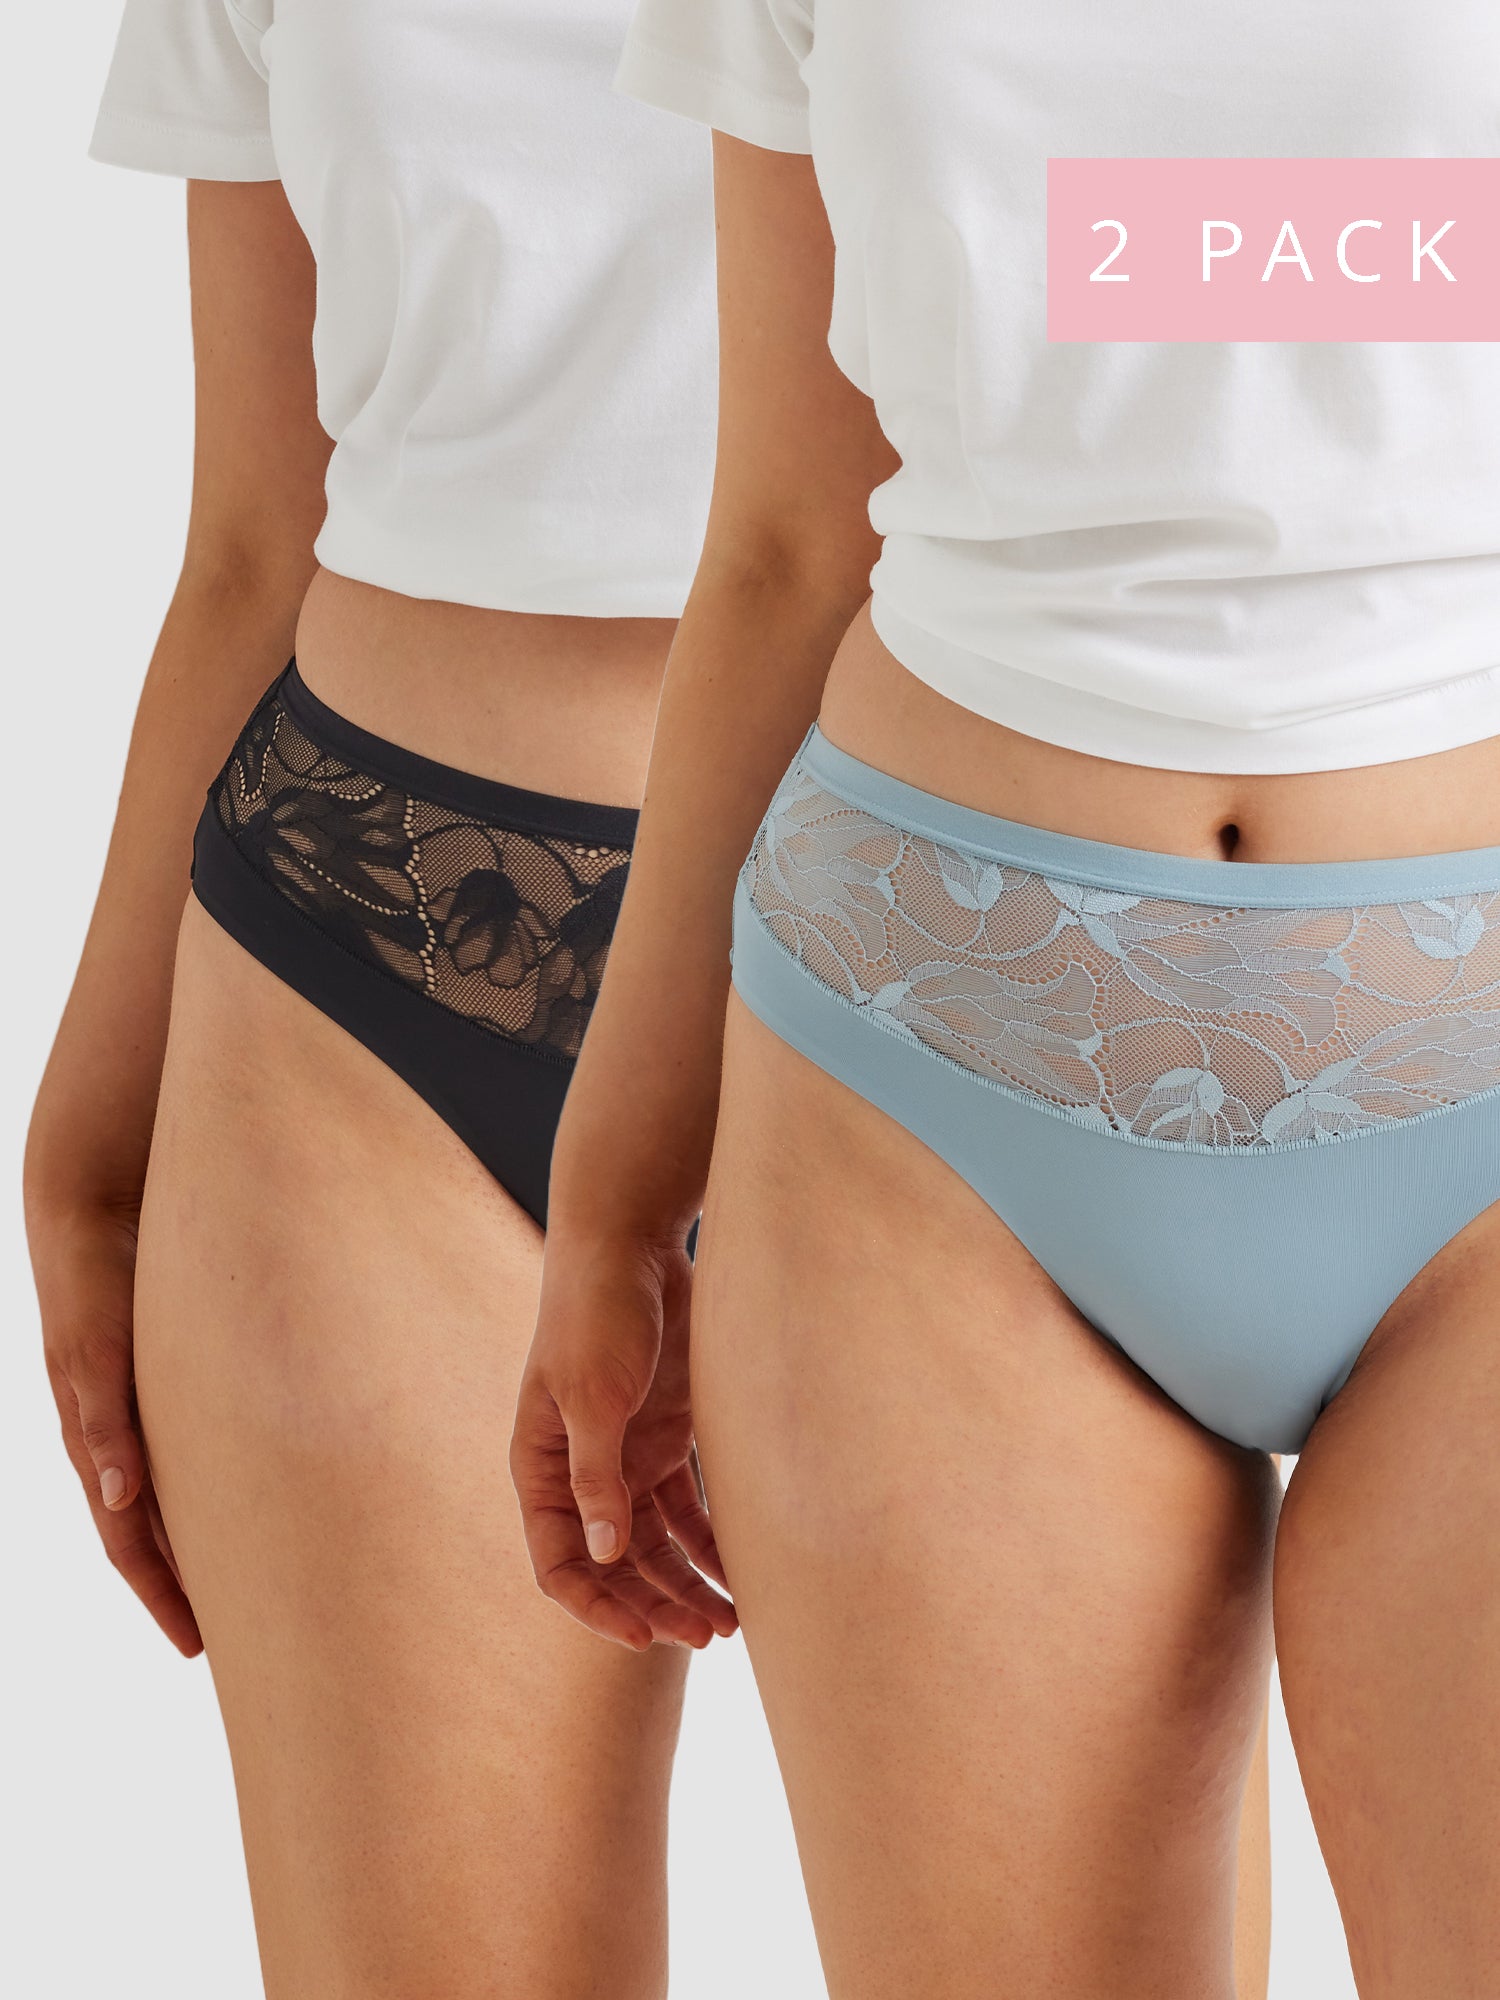 2 Pack Smooth All Over Lace Hi Cut Brief - Black & Sky Blue - Kayser